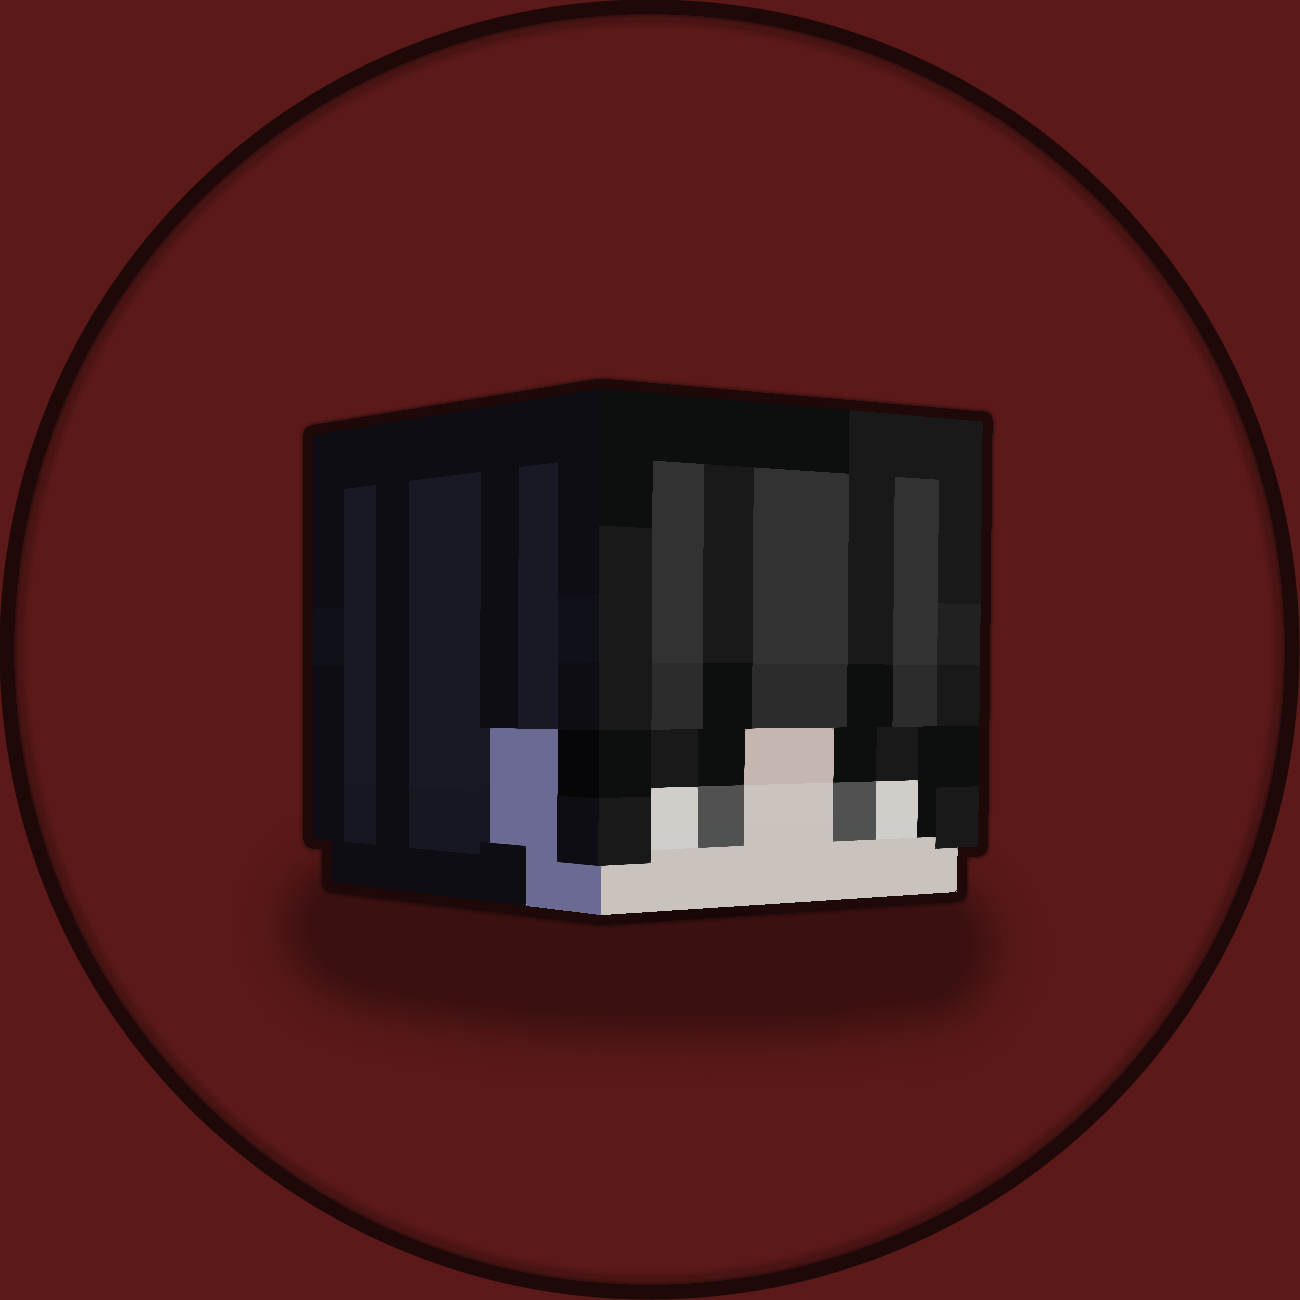 Waitress's Profile Picture on PvPRP